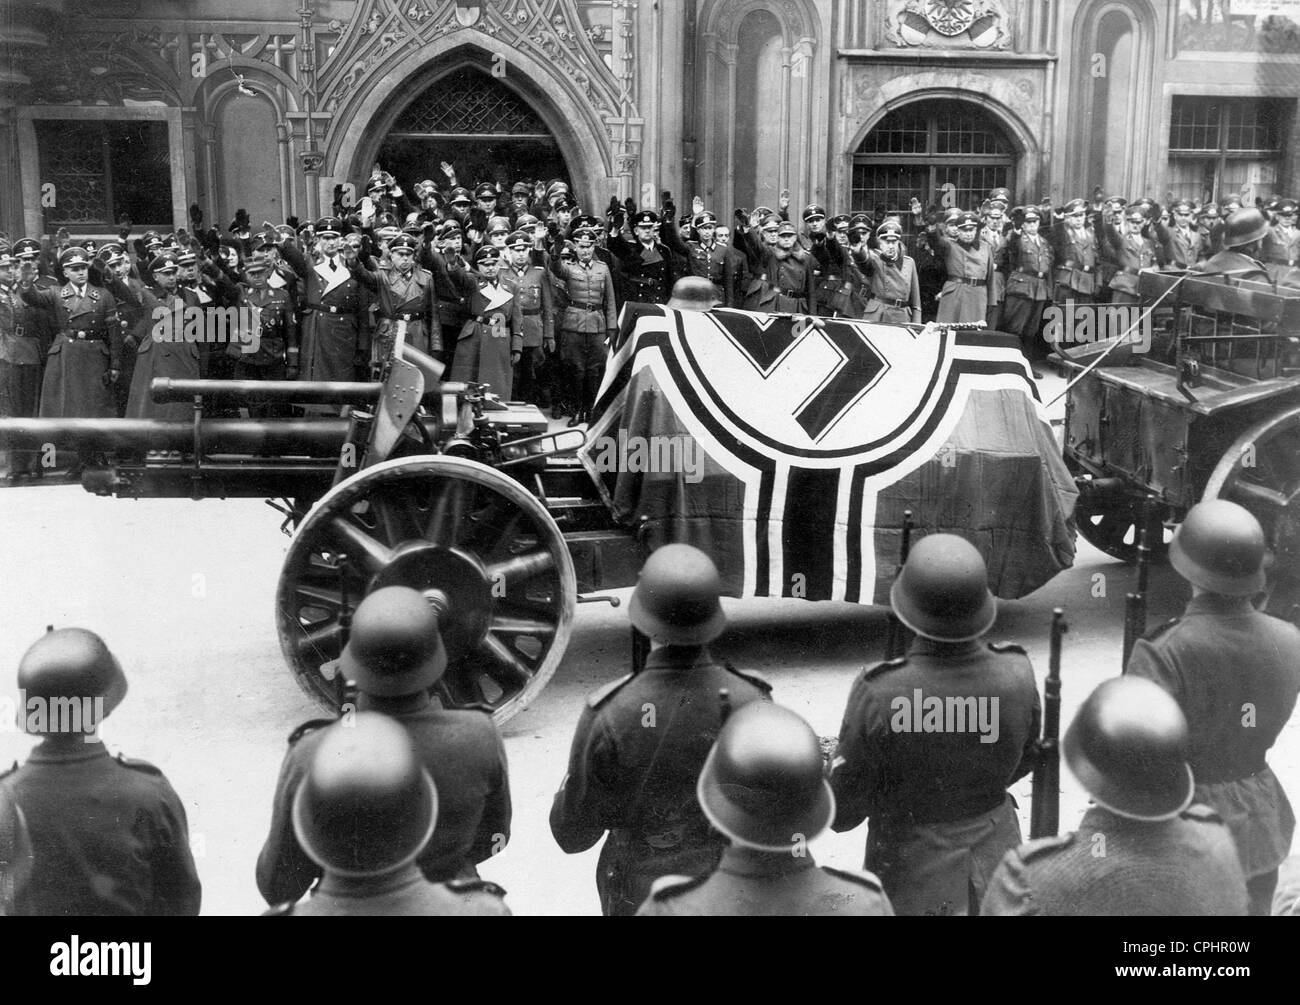 State Funeral procession for General Field Marshal Erwin Rommel, Ulm, 1944  (b/w photo Stock Photo - Alamy